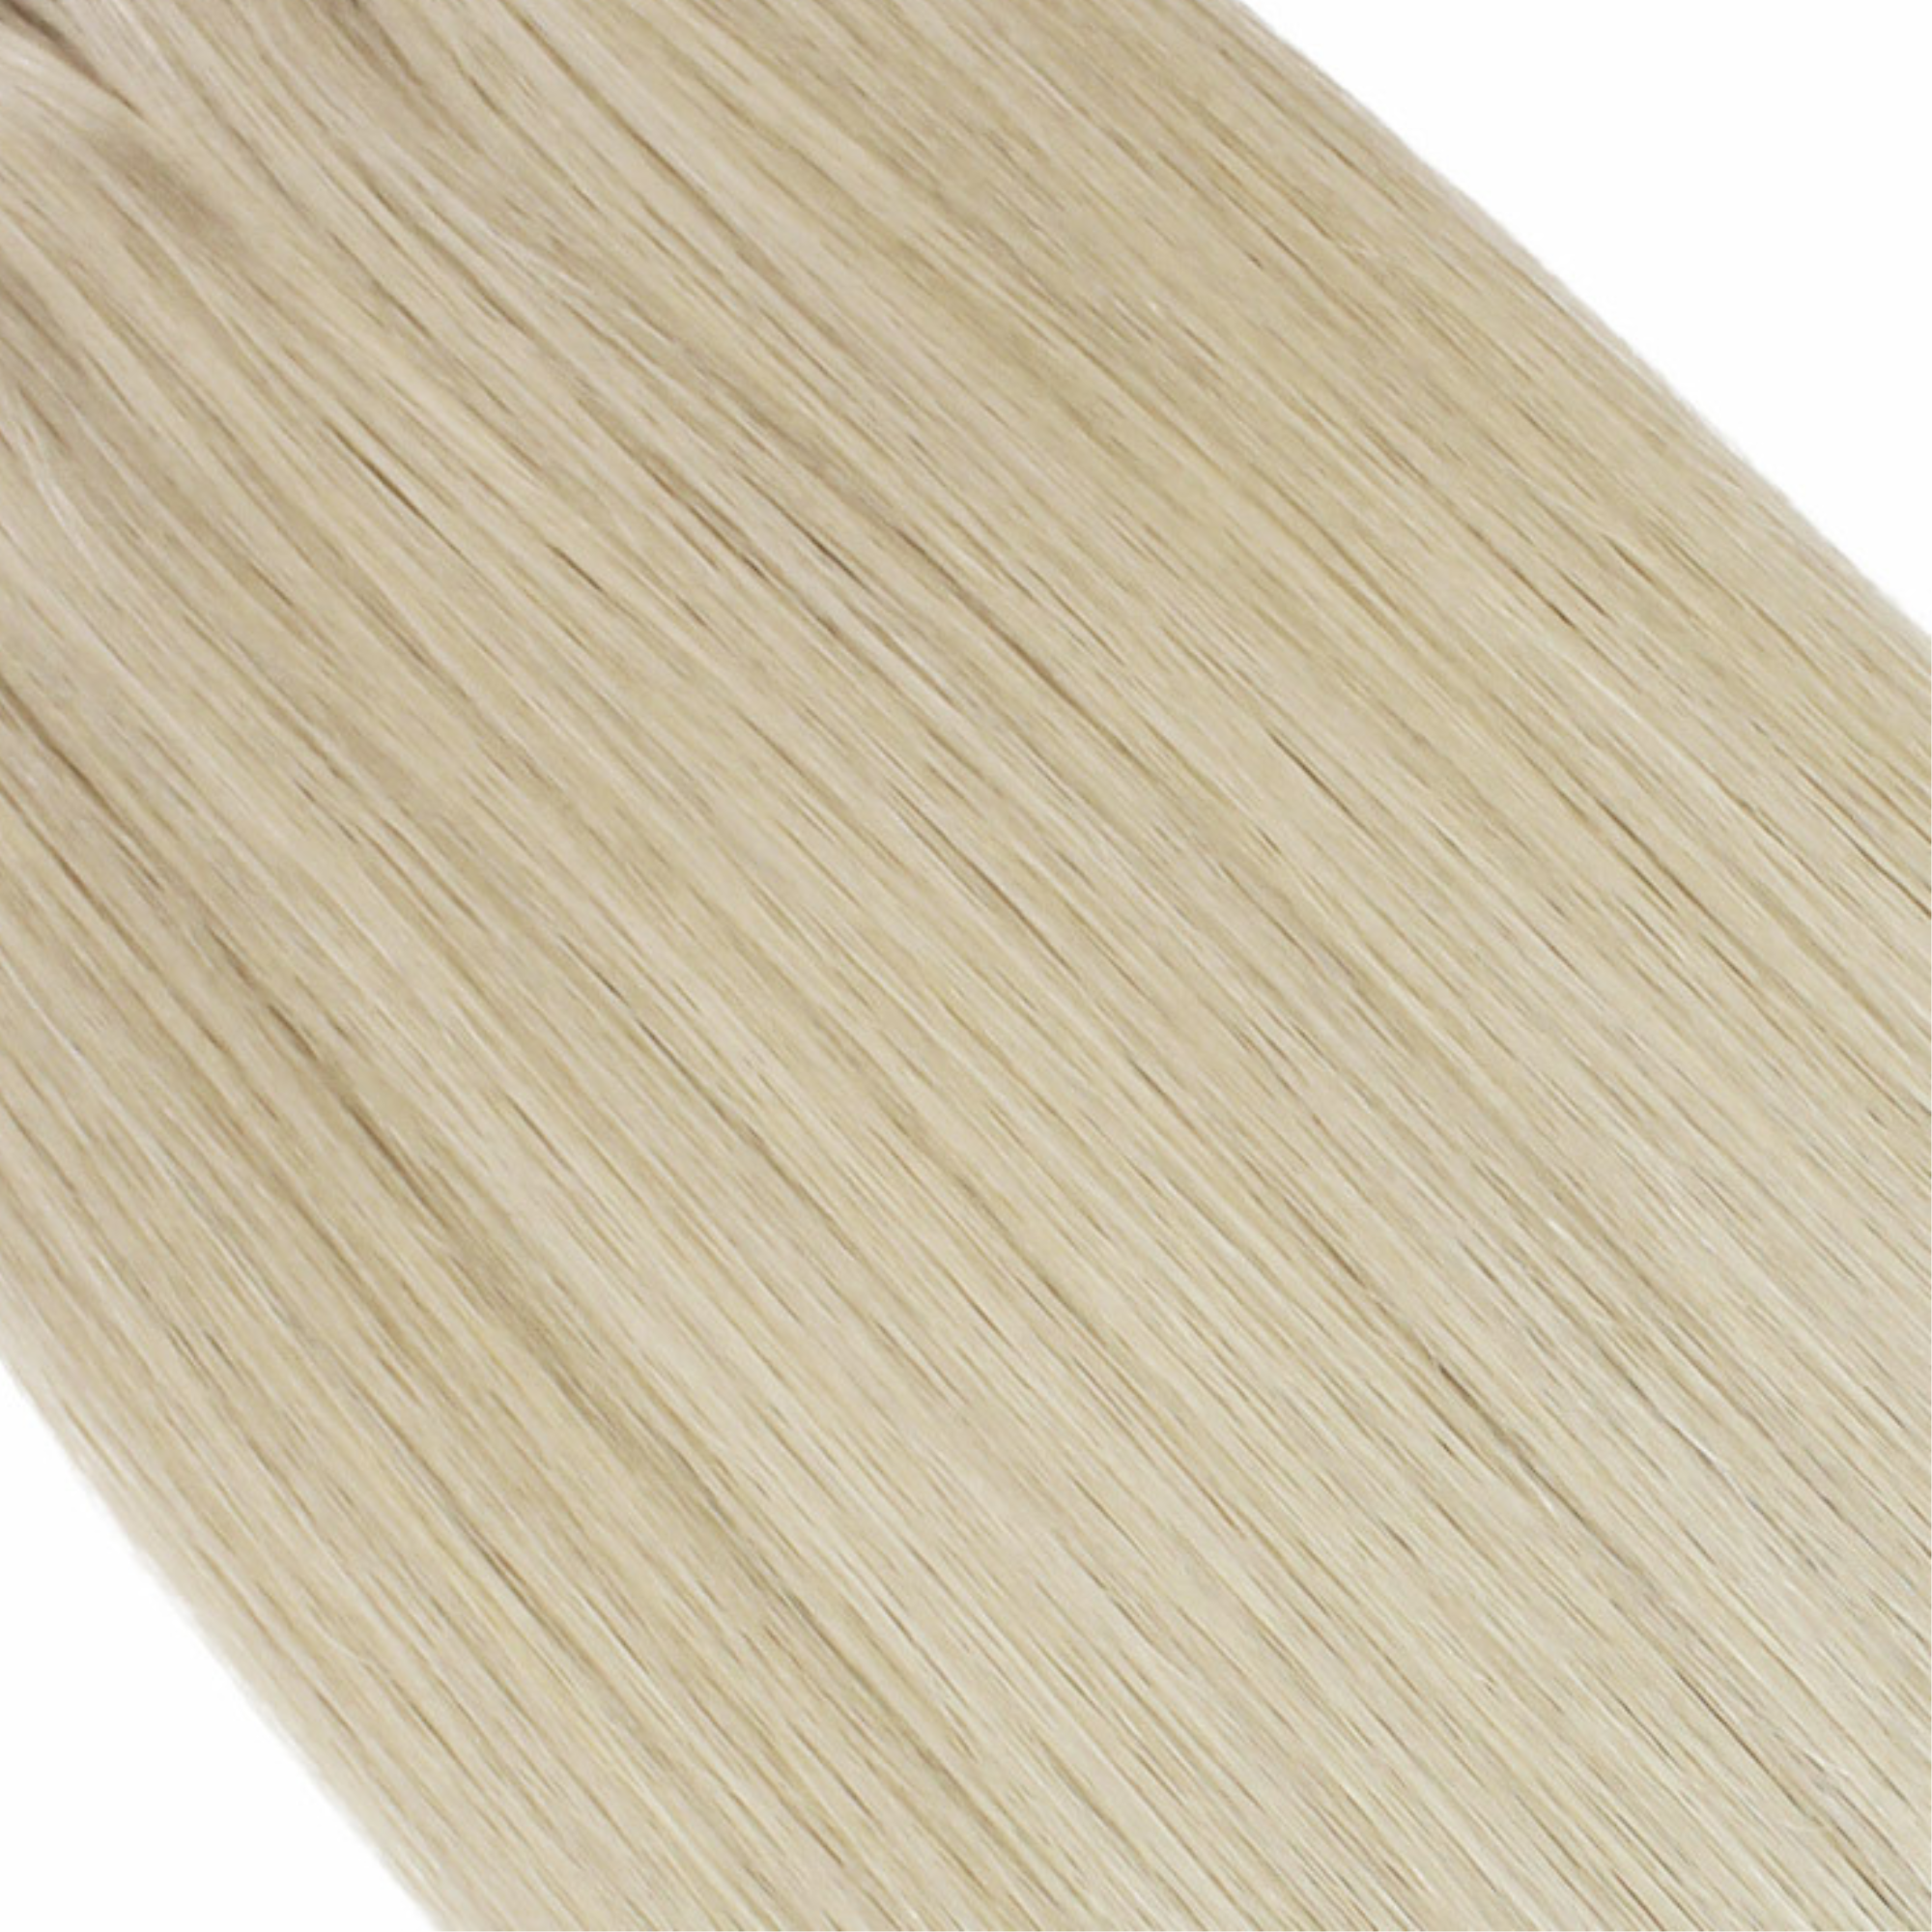 "hair rehab london 20" length 180 grams weight luxe clip-in hair extensions shade titled ice blonde"